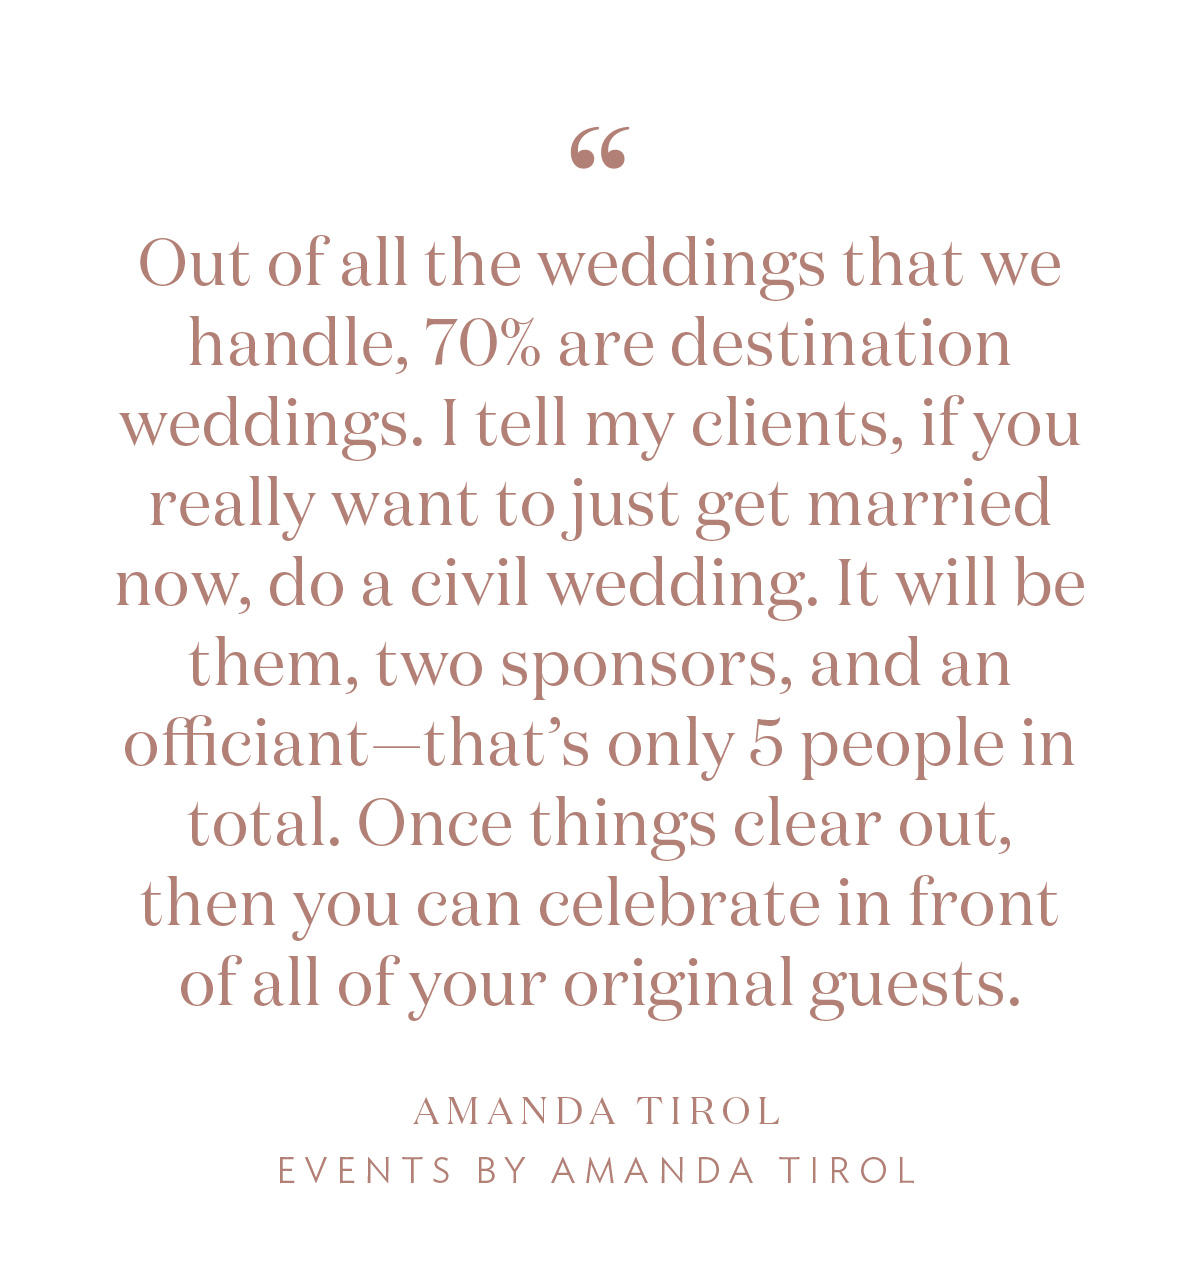 “Out of all the weddings that we handle, 70% are destination weddings. I tell my clients, if you really want to just get married now, do a civil wedding. It will be them, two sponsors, and an officiant—that’s only 5 people in total. Once things clear out, then you can celebrate in front of all of your original guests.” -Amanda Tirol, Events by Amanda Tirol